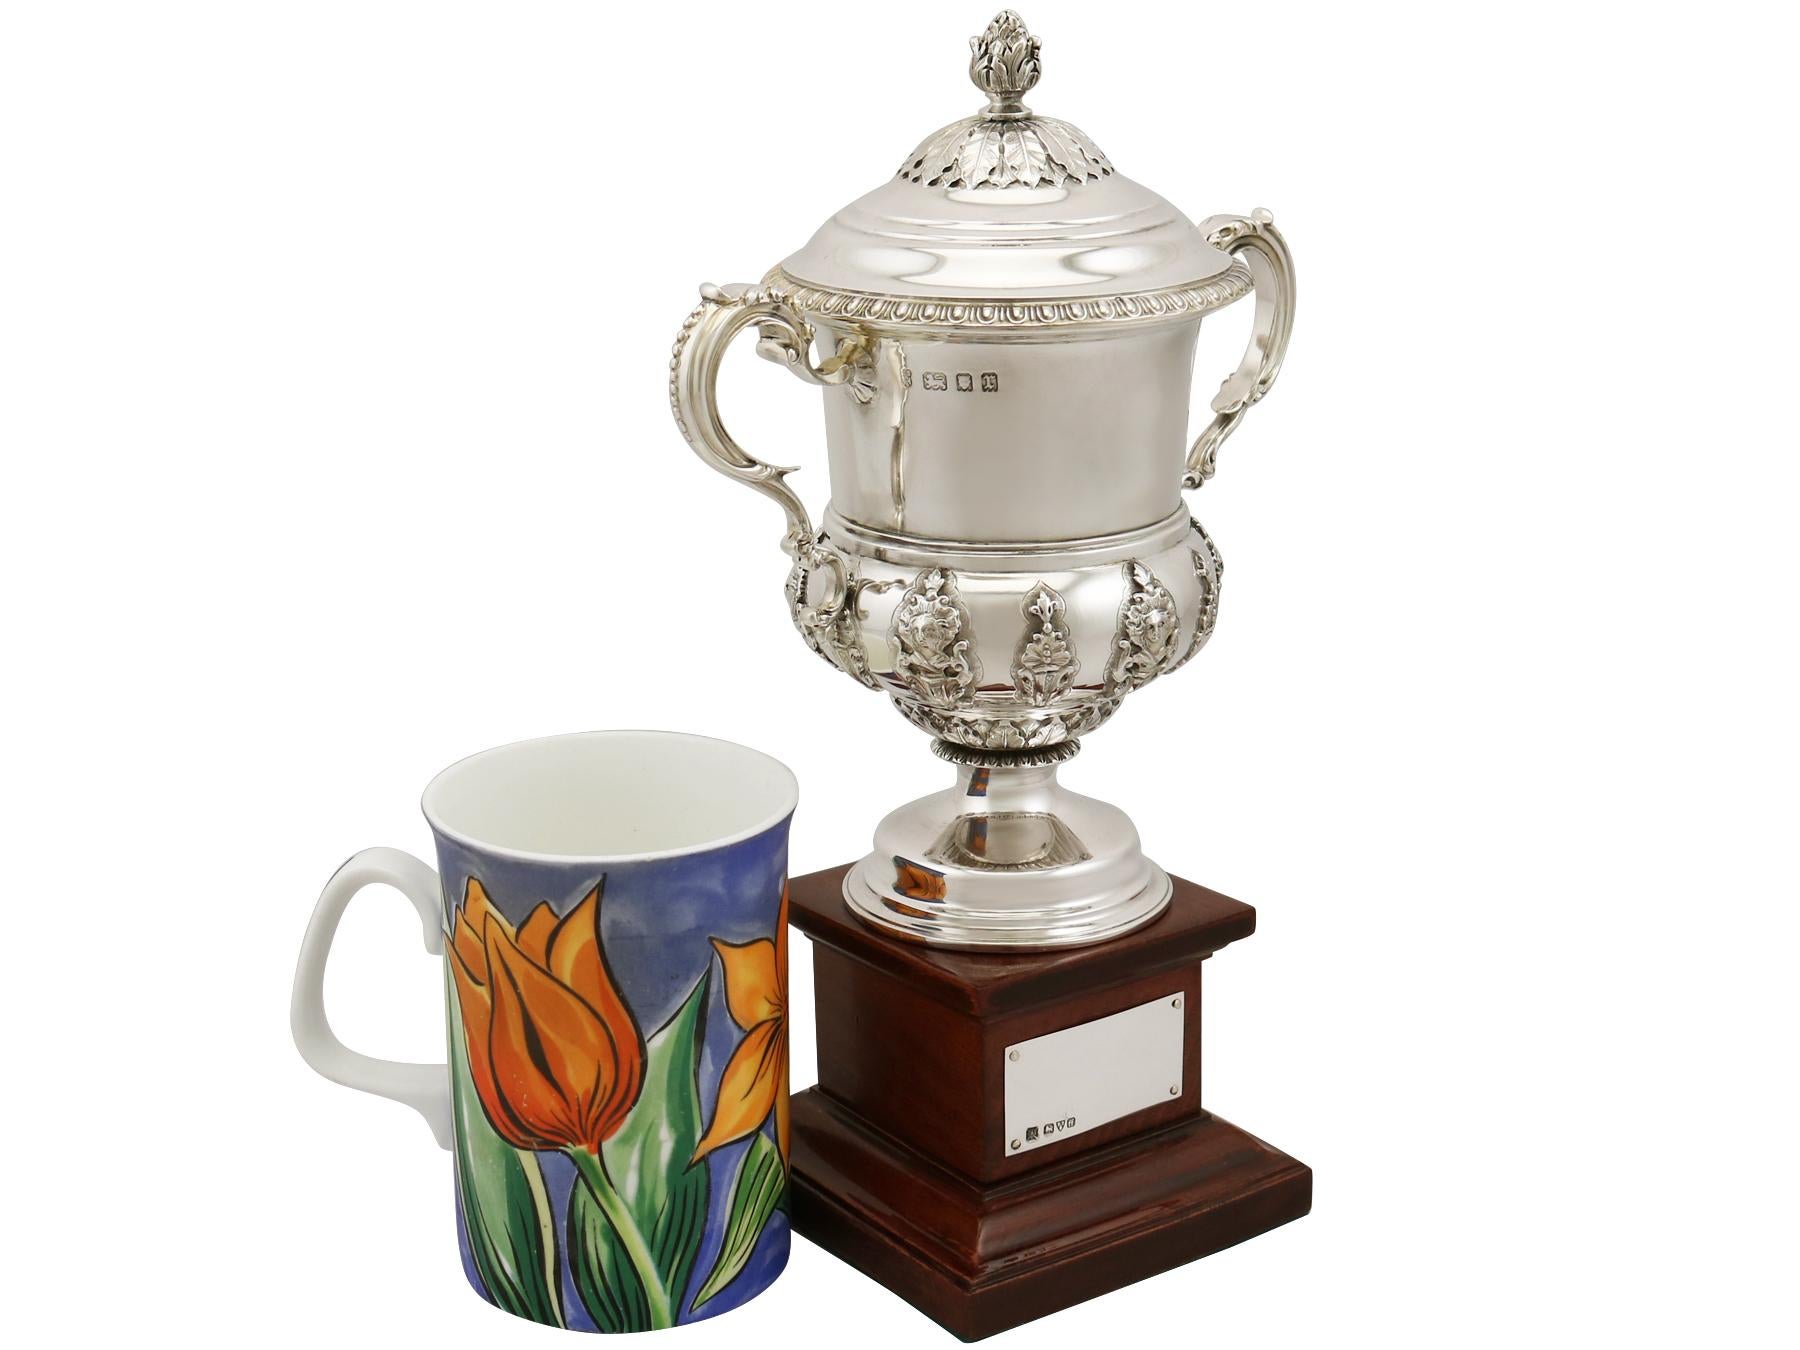 An exceptional, fine and impressive antique George V English sterling silver presentation cup with cover and original plinth; an addition to our presentation silverware collection.

This exceptional antique sterling silver trophy cup with stand